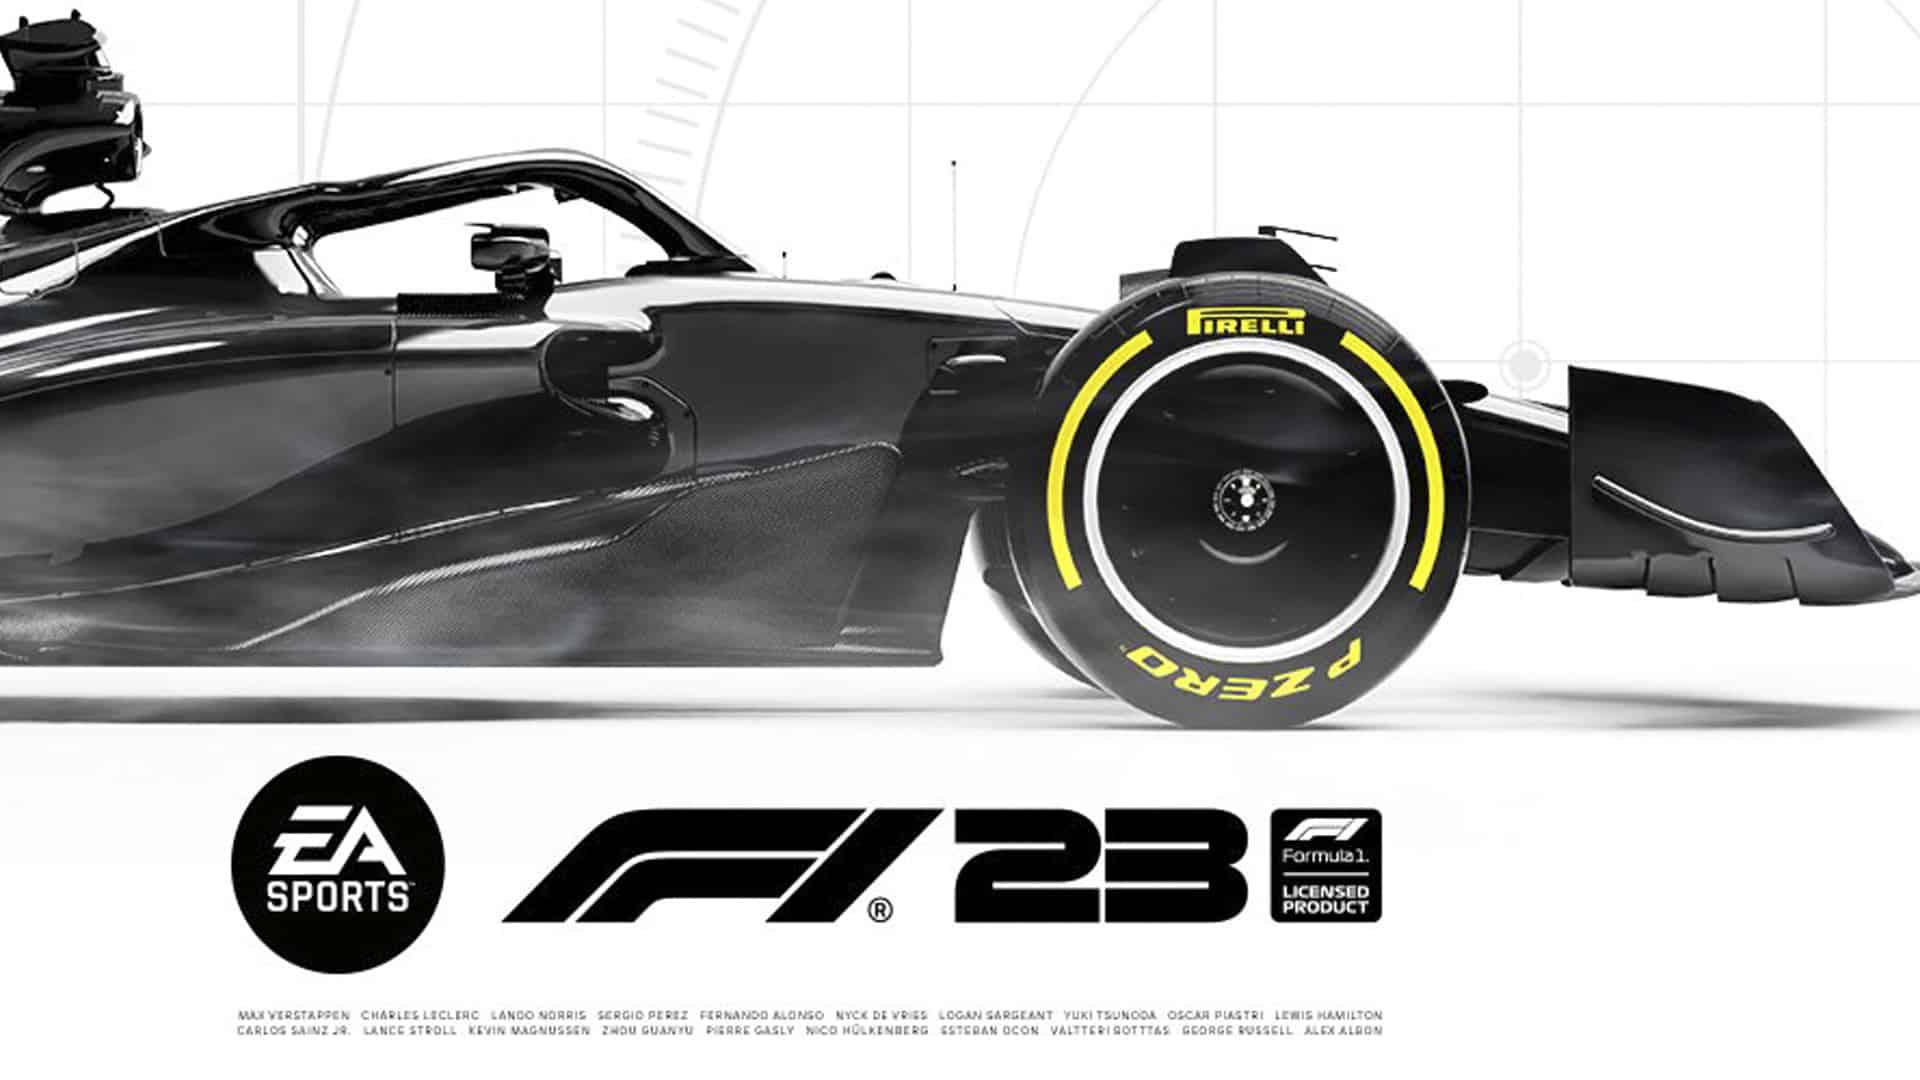 EA SPORTS F1 23 will be called EA SPORTS F1 23 | Traxion